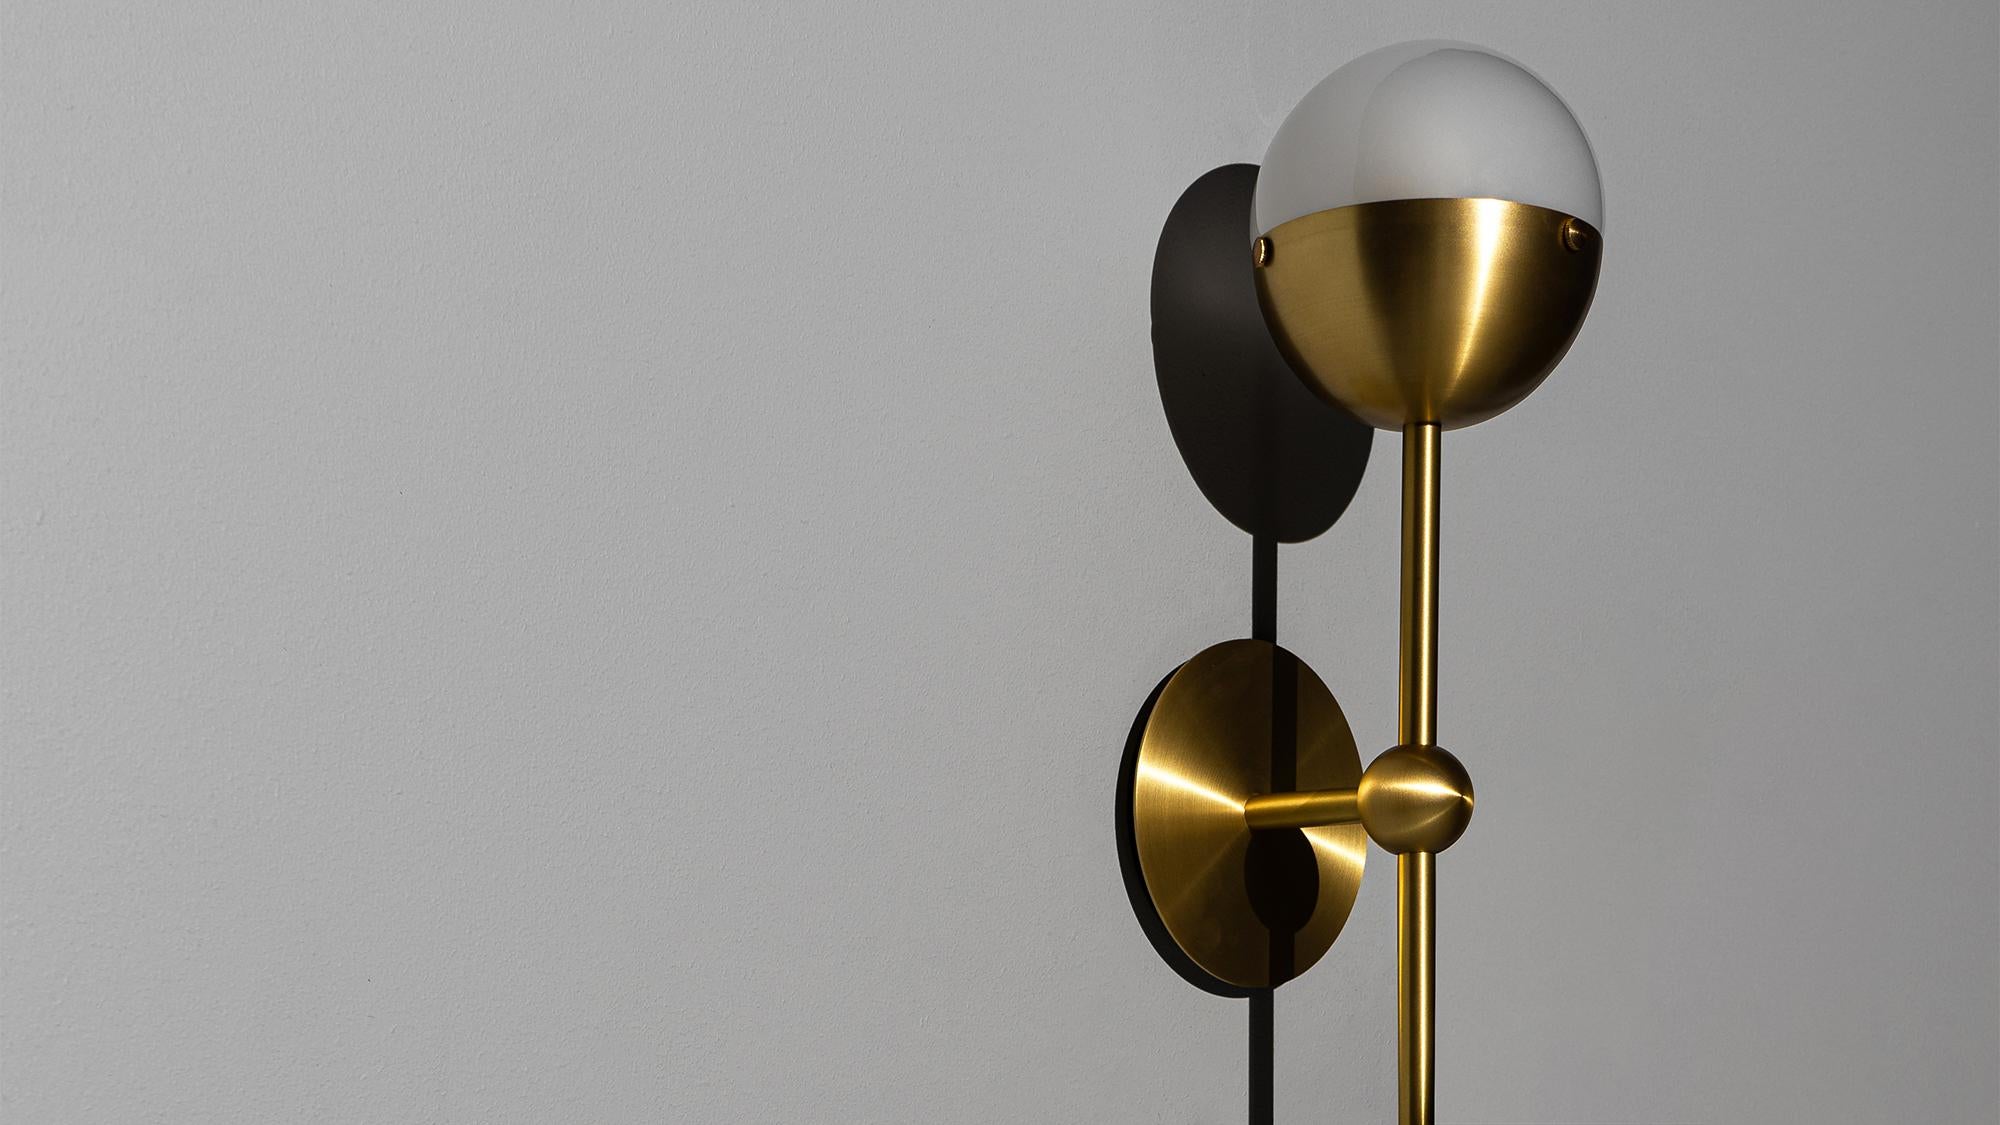 Recalling the basic elements of matter, this wall-mounted molecular model is composed of brass connections. A single bulb is amplified by borosilicate glass to light up spaces large or small.

Available in our three signature finishes: Lacquered